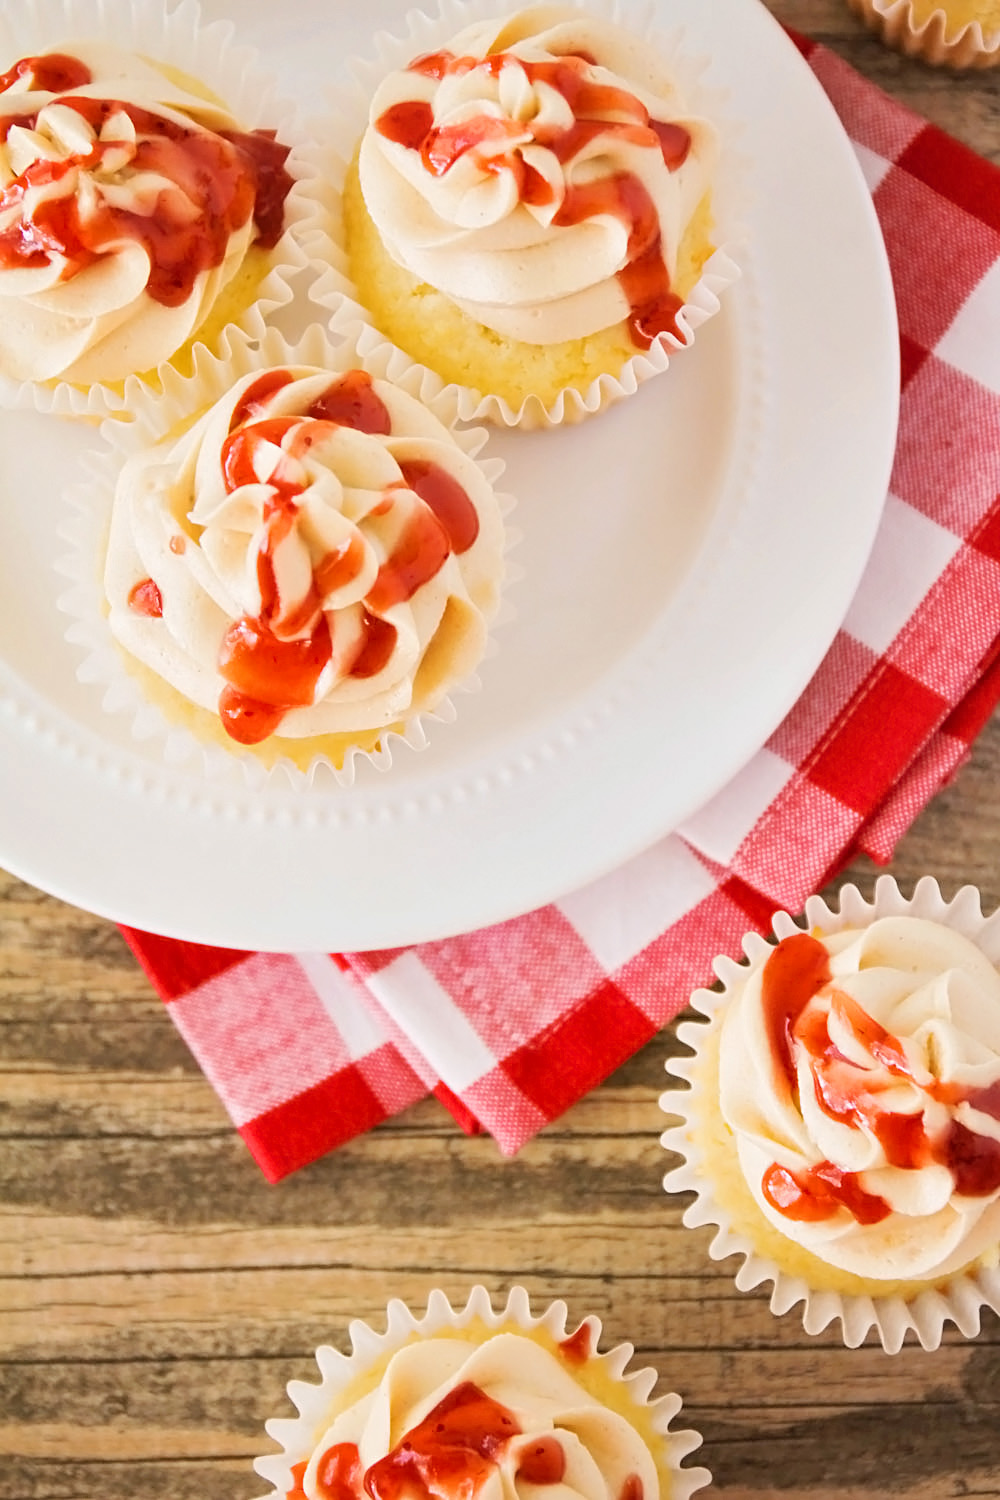 These peanut butter and jelly cupcakes are so fun and delicious! Tender white cake filled with strawberry jam and topped with a delicious peanut butter buttercream. Yum!